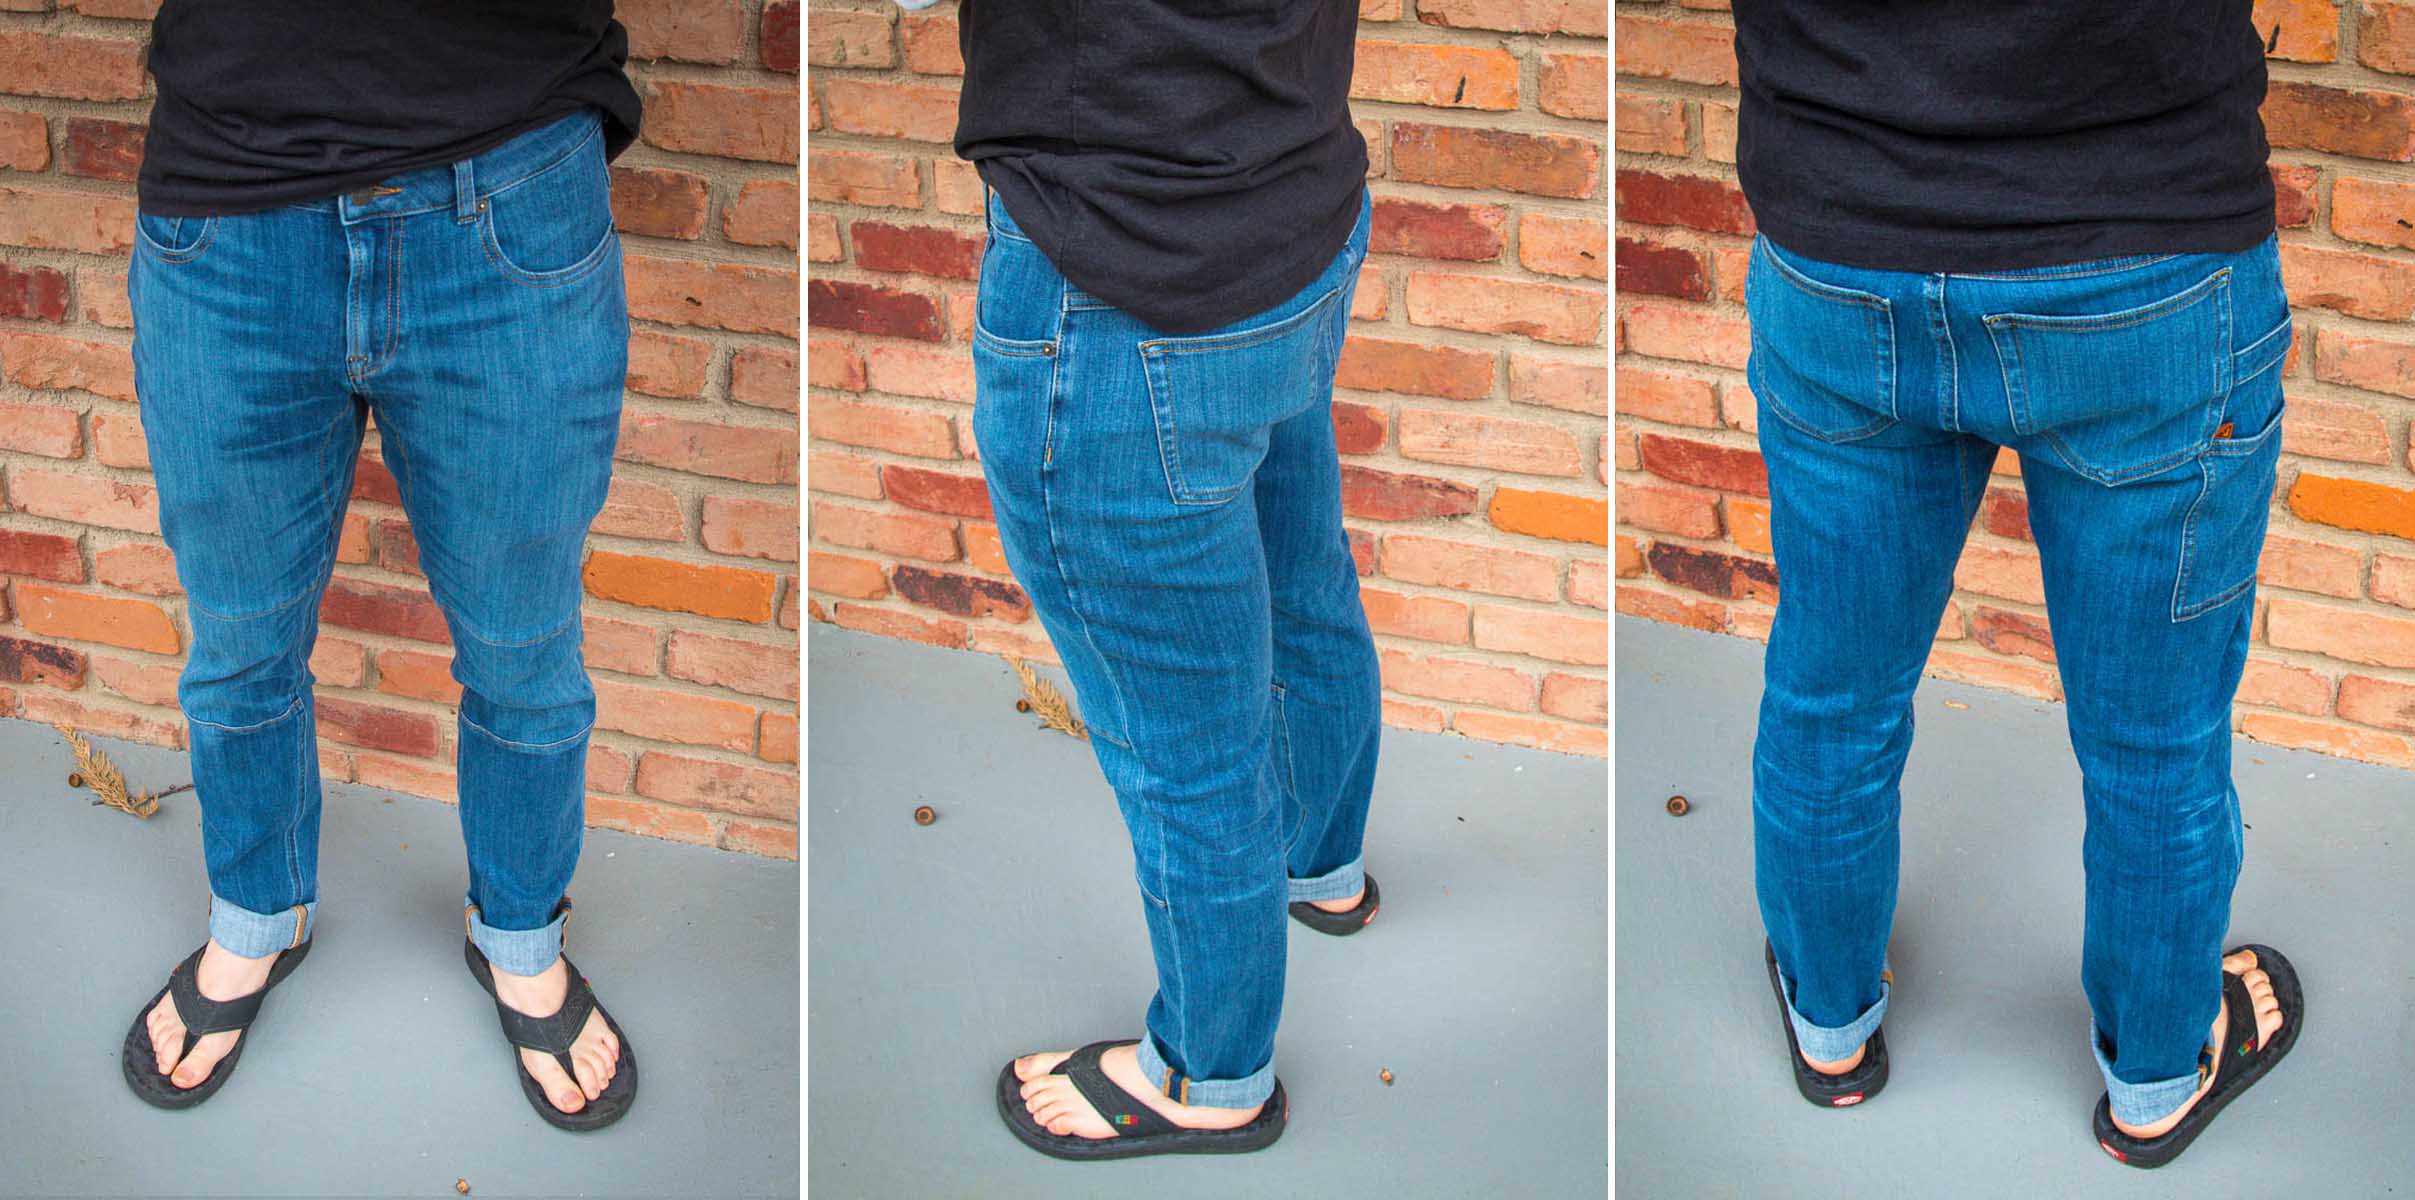 Boulder Denim 3.0 jeans for cyclists people with big legs butts thighs